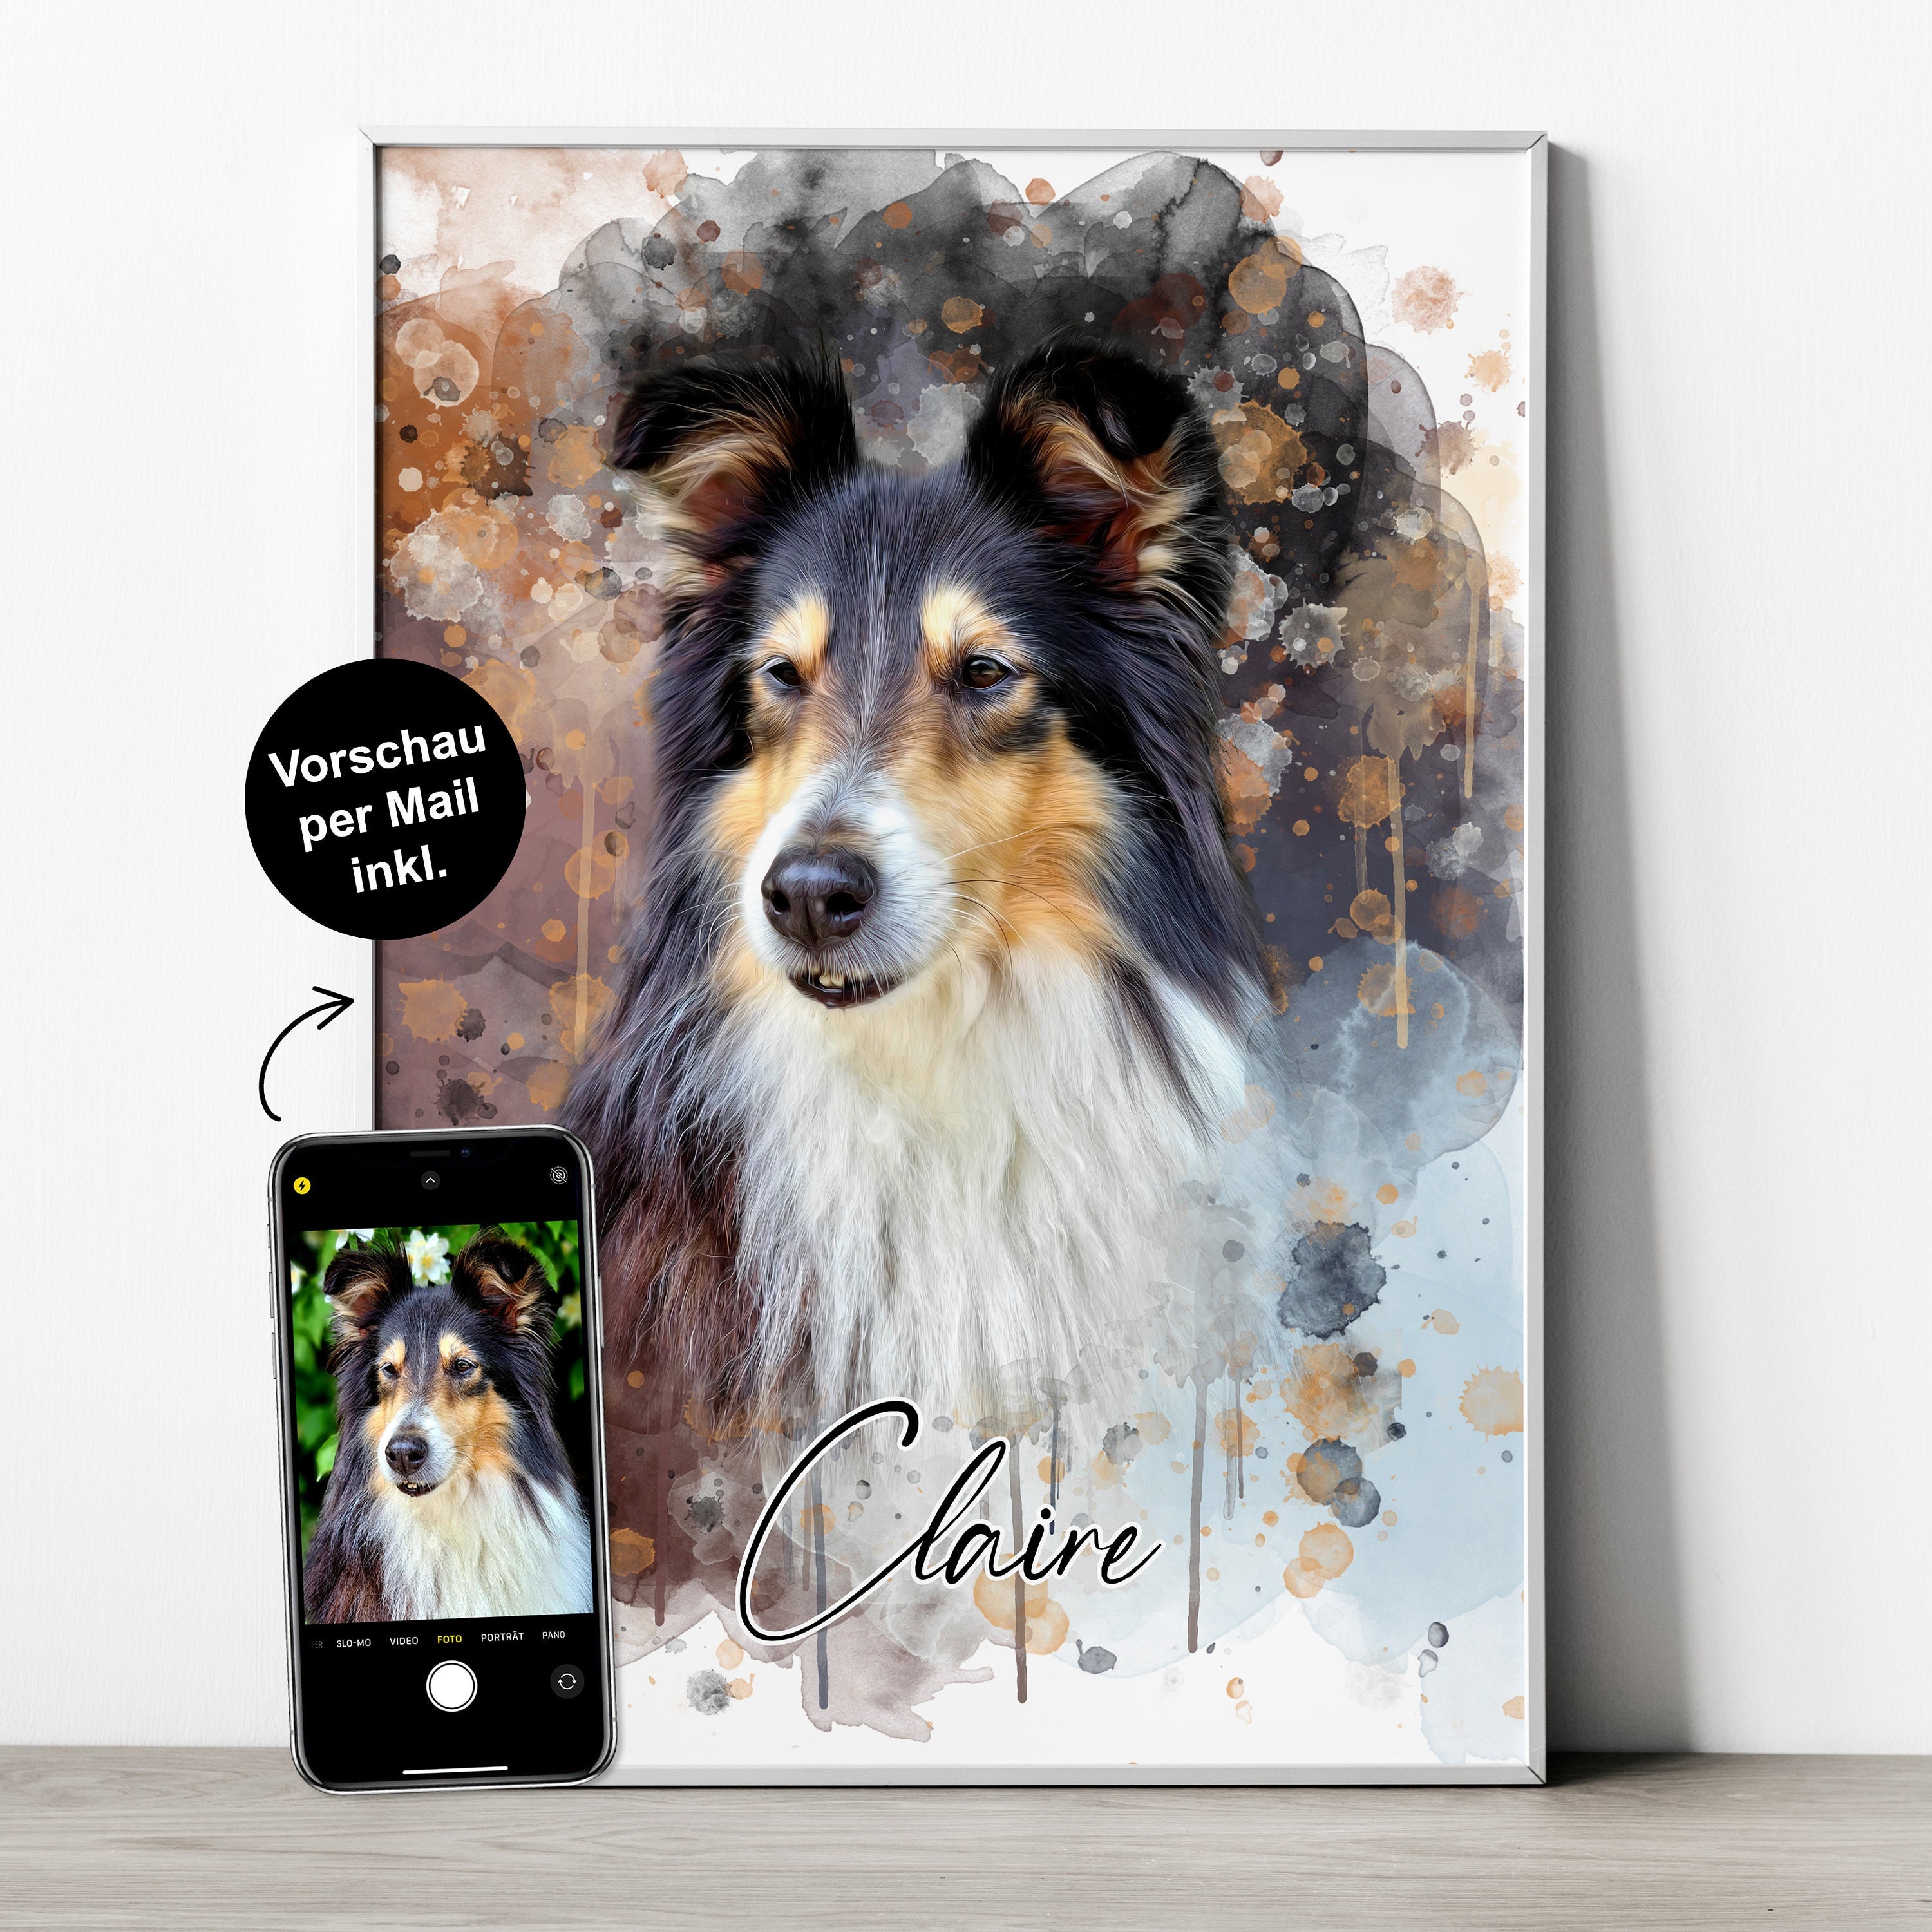 Animal Portrait in Watercolor Style Dog, Cat, Horse Etc. as a Portrait  Based on a Template Perfect as Decoration, Gift, Keepsake & Reminder 